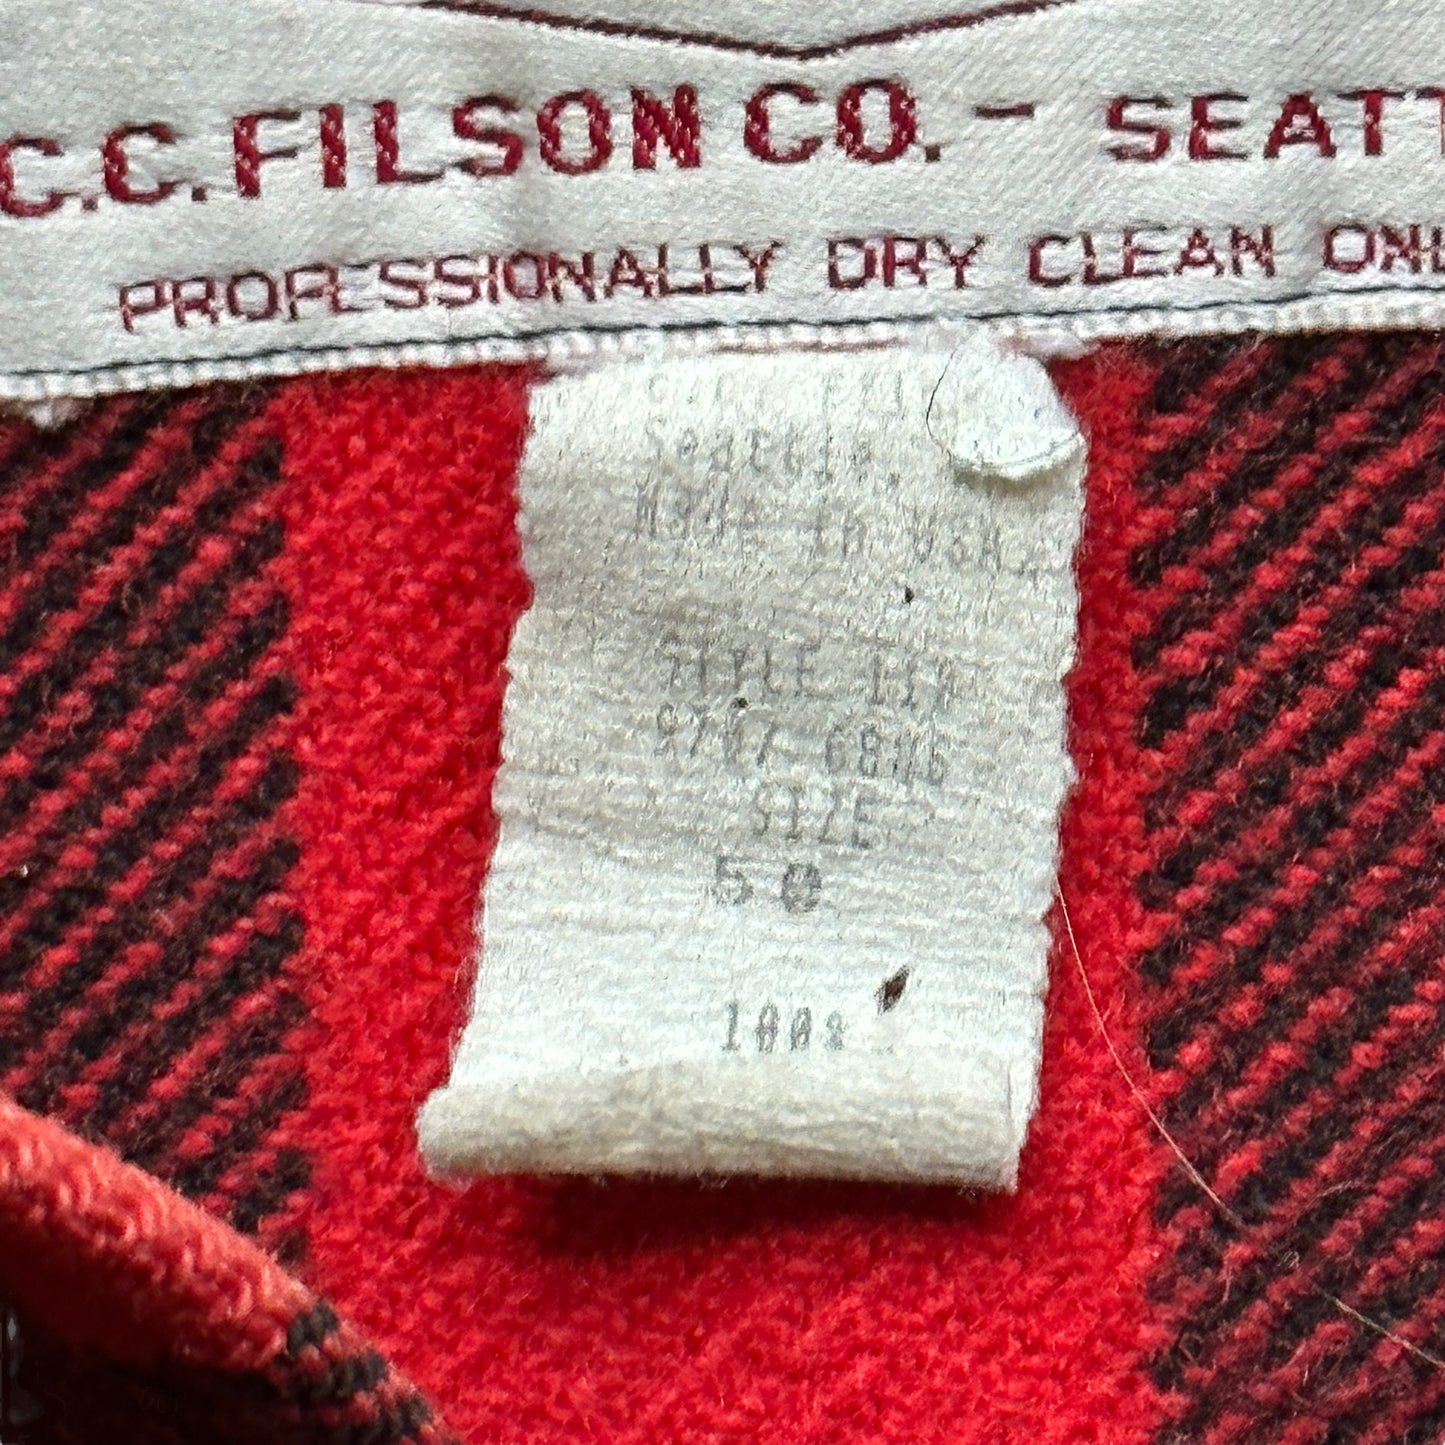 Tag View of Vintage Visibly Repaired 90s Era Filson Mackinaw Cruiser Size 50 |  Barn Owl Vintage Goods | Vintage Filson Workwear Seattle